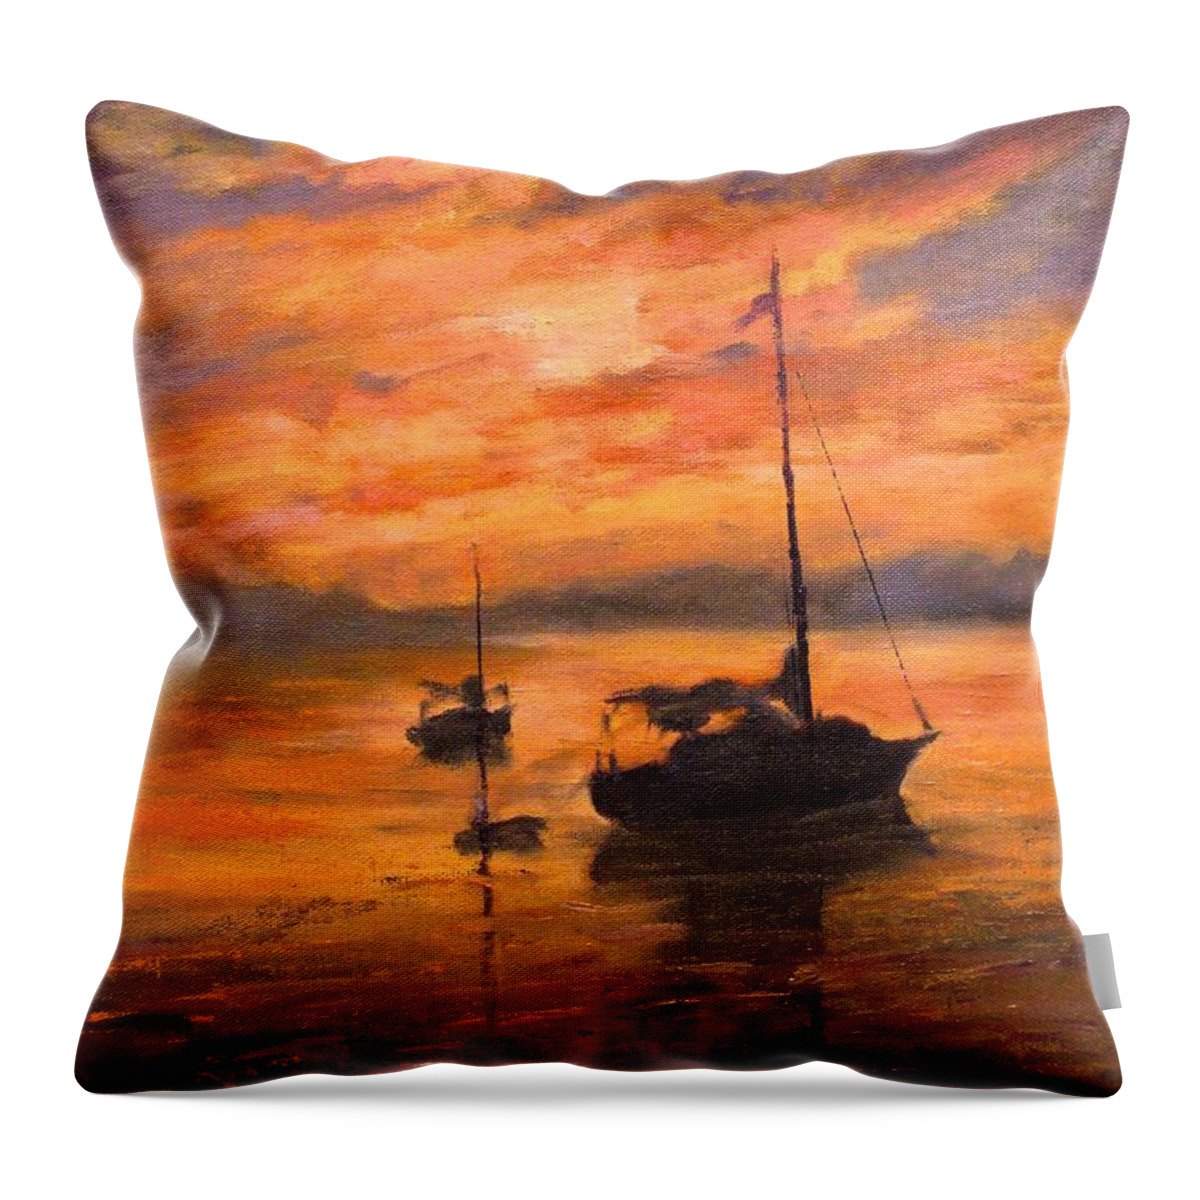 Boats Throw Pillow featuring the painting The Day is Done by B Rossitto